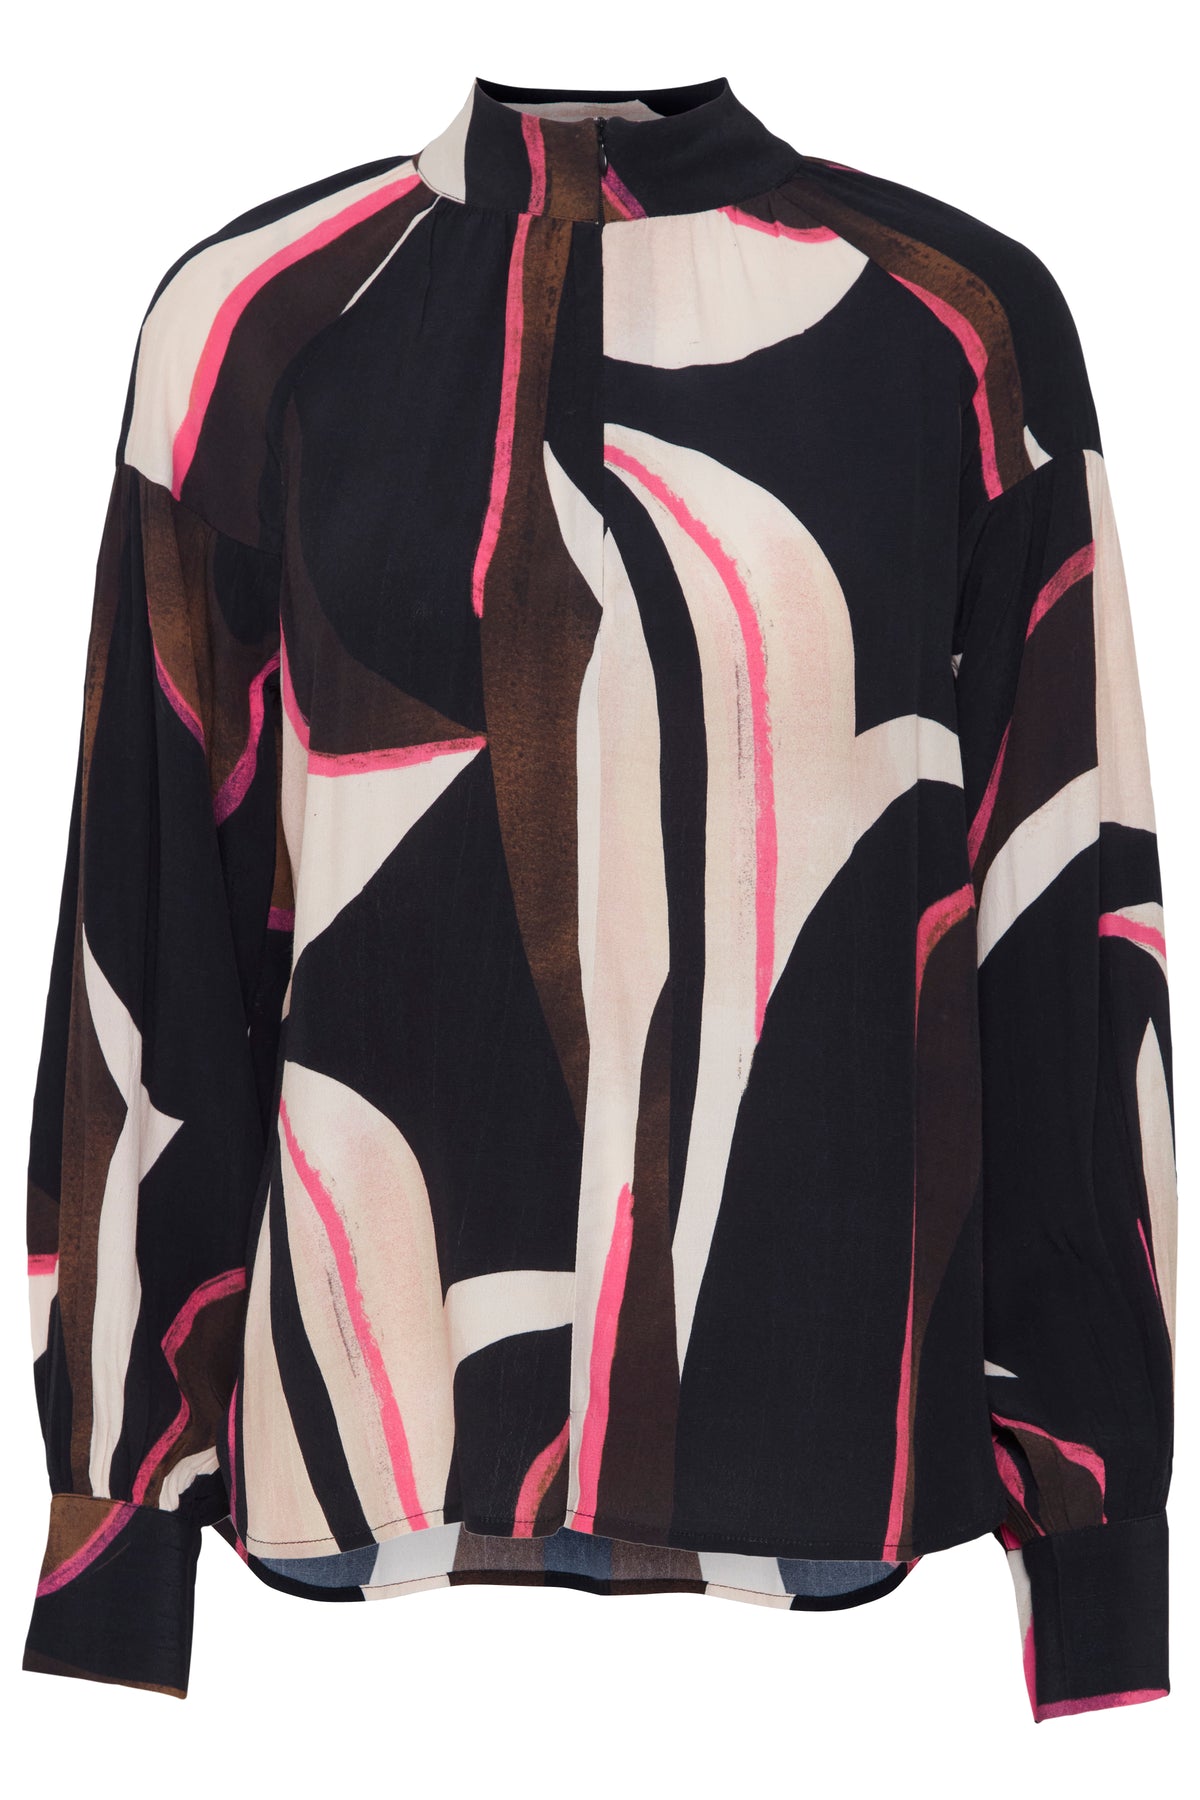 Fransa Frlena Navy Blazer/Pink Abstract Printed Blouse, Ruby Boutique 20613285 67 –